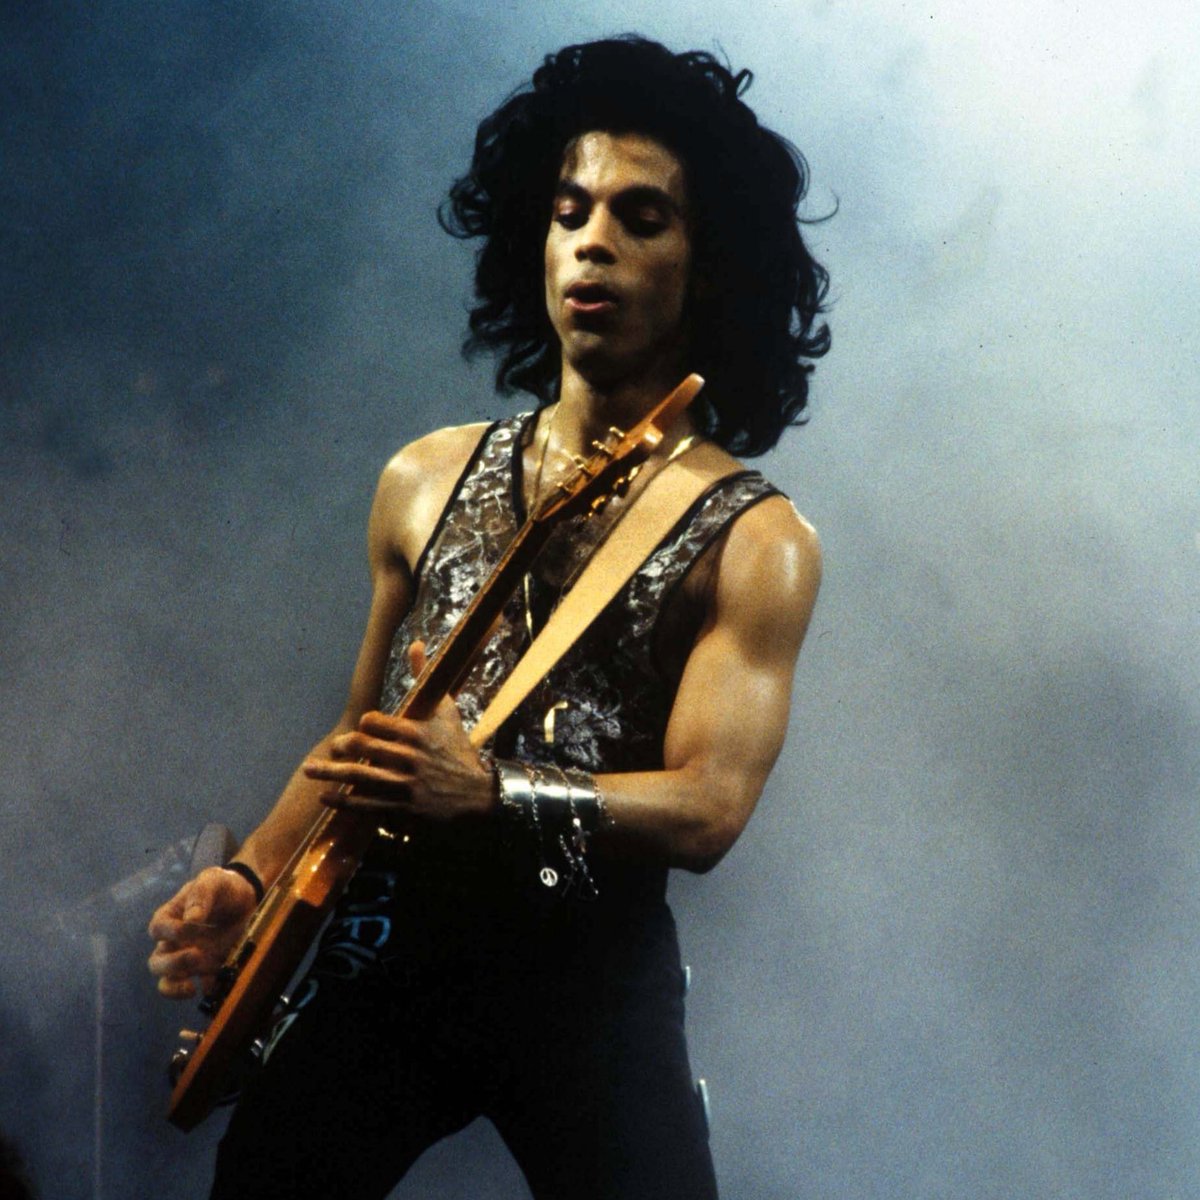 Today marks eight years since Prince’s death. Thank you for the music. RIP.